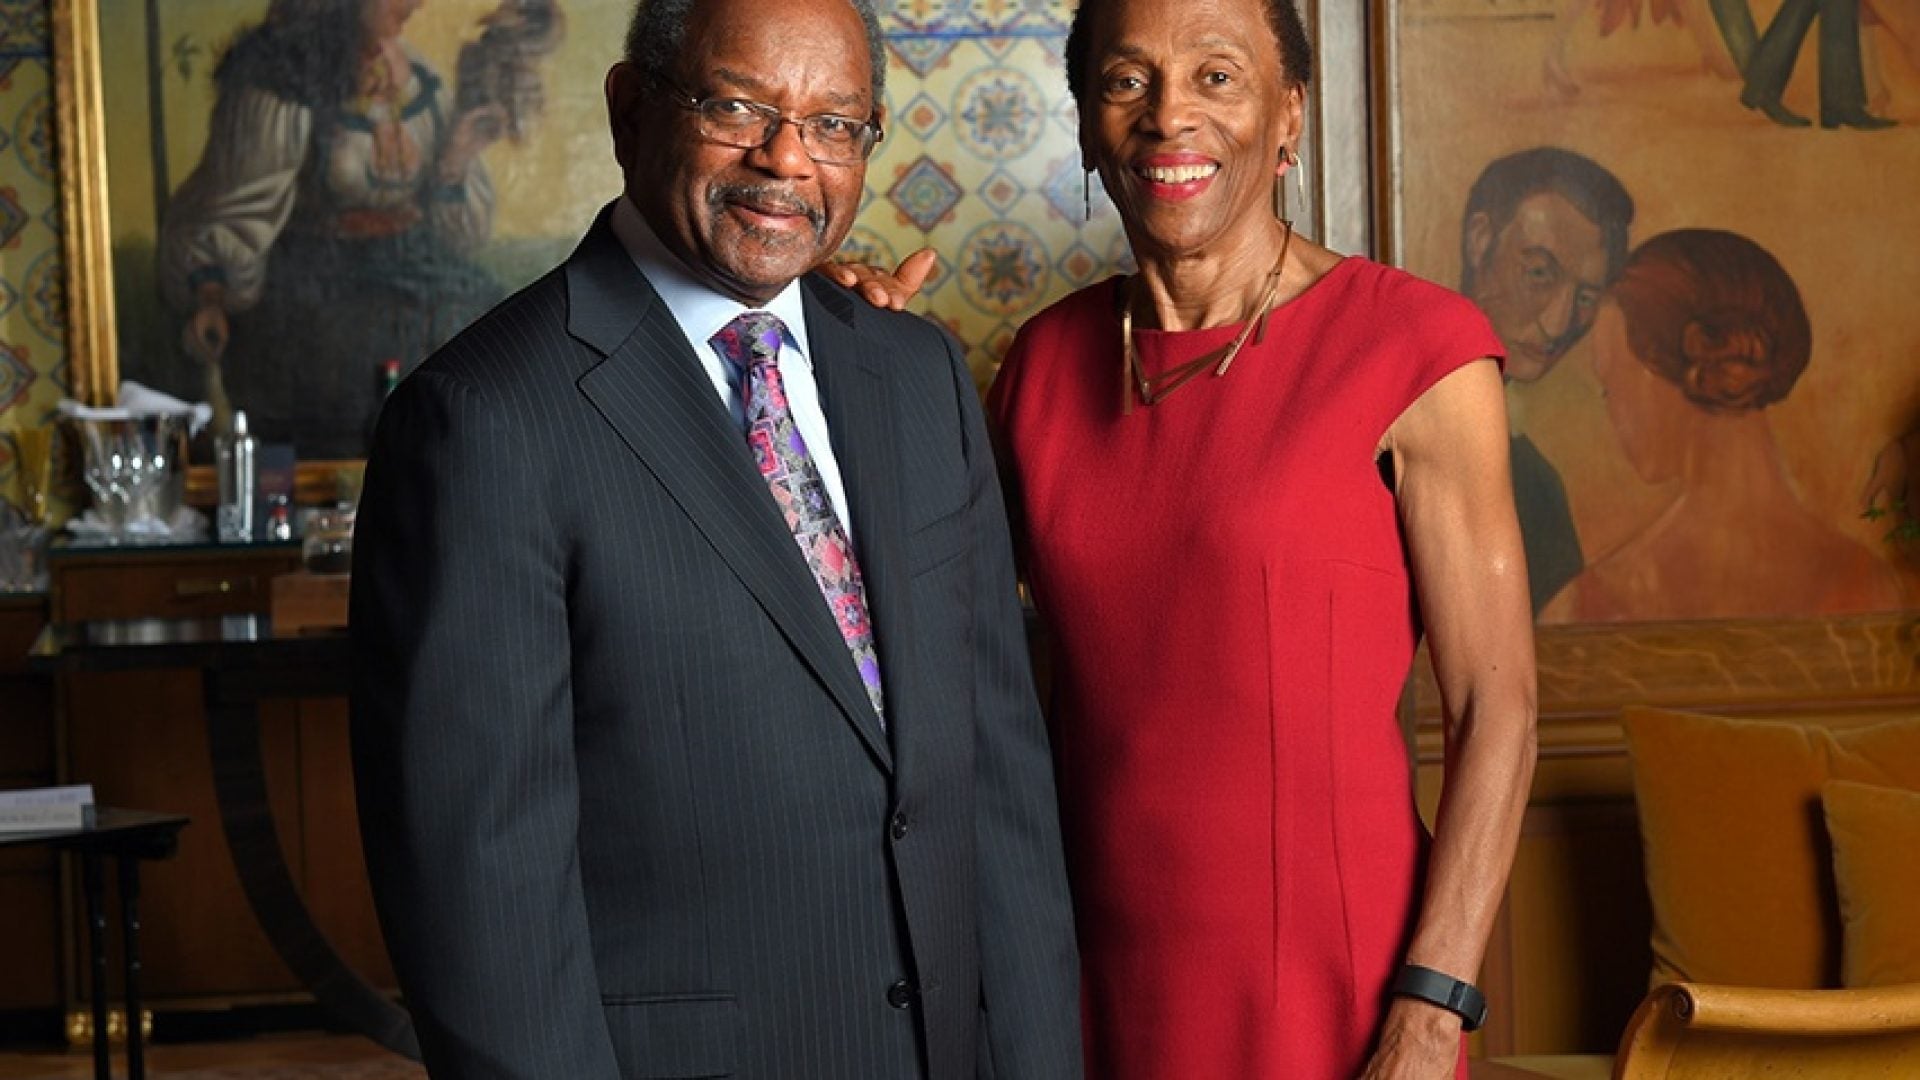 Howard University Receives Largest Donation In History From Black Couple